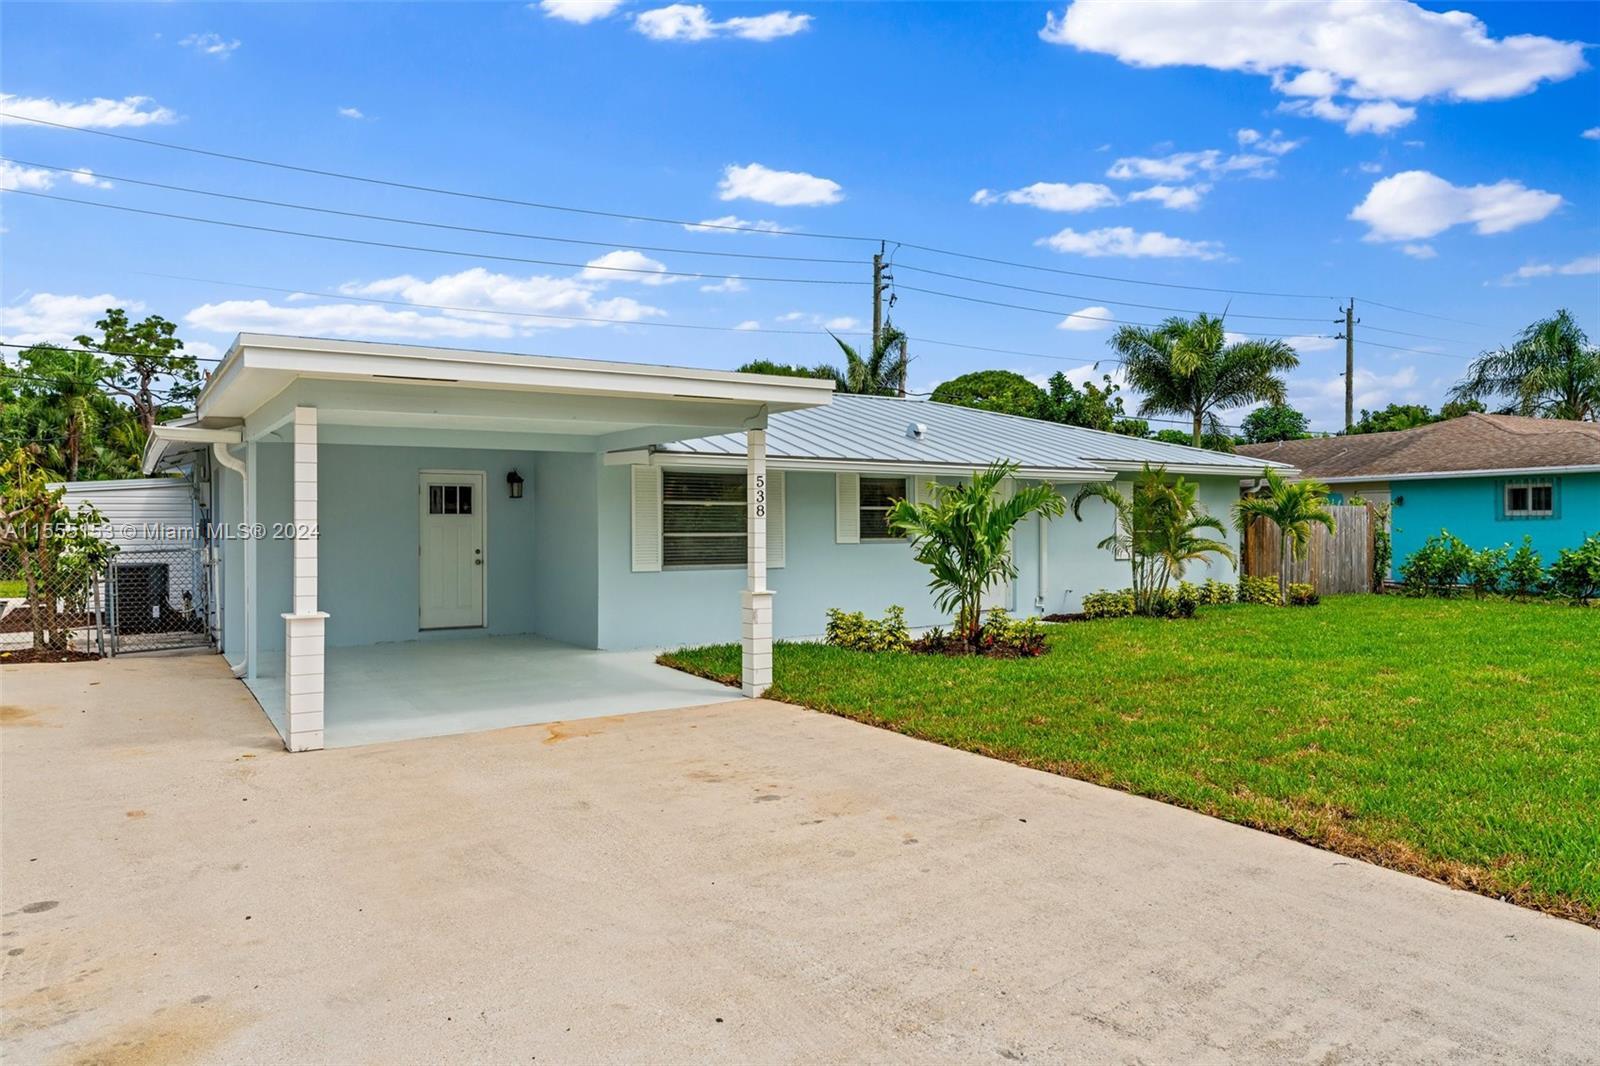 This newly remodeled pool home in Tequesta features 3 bedrooms and 3 baths, two of the bedrooms are 